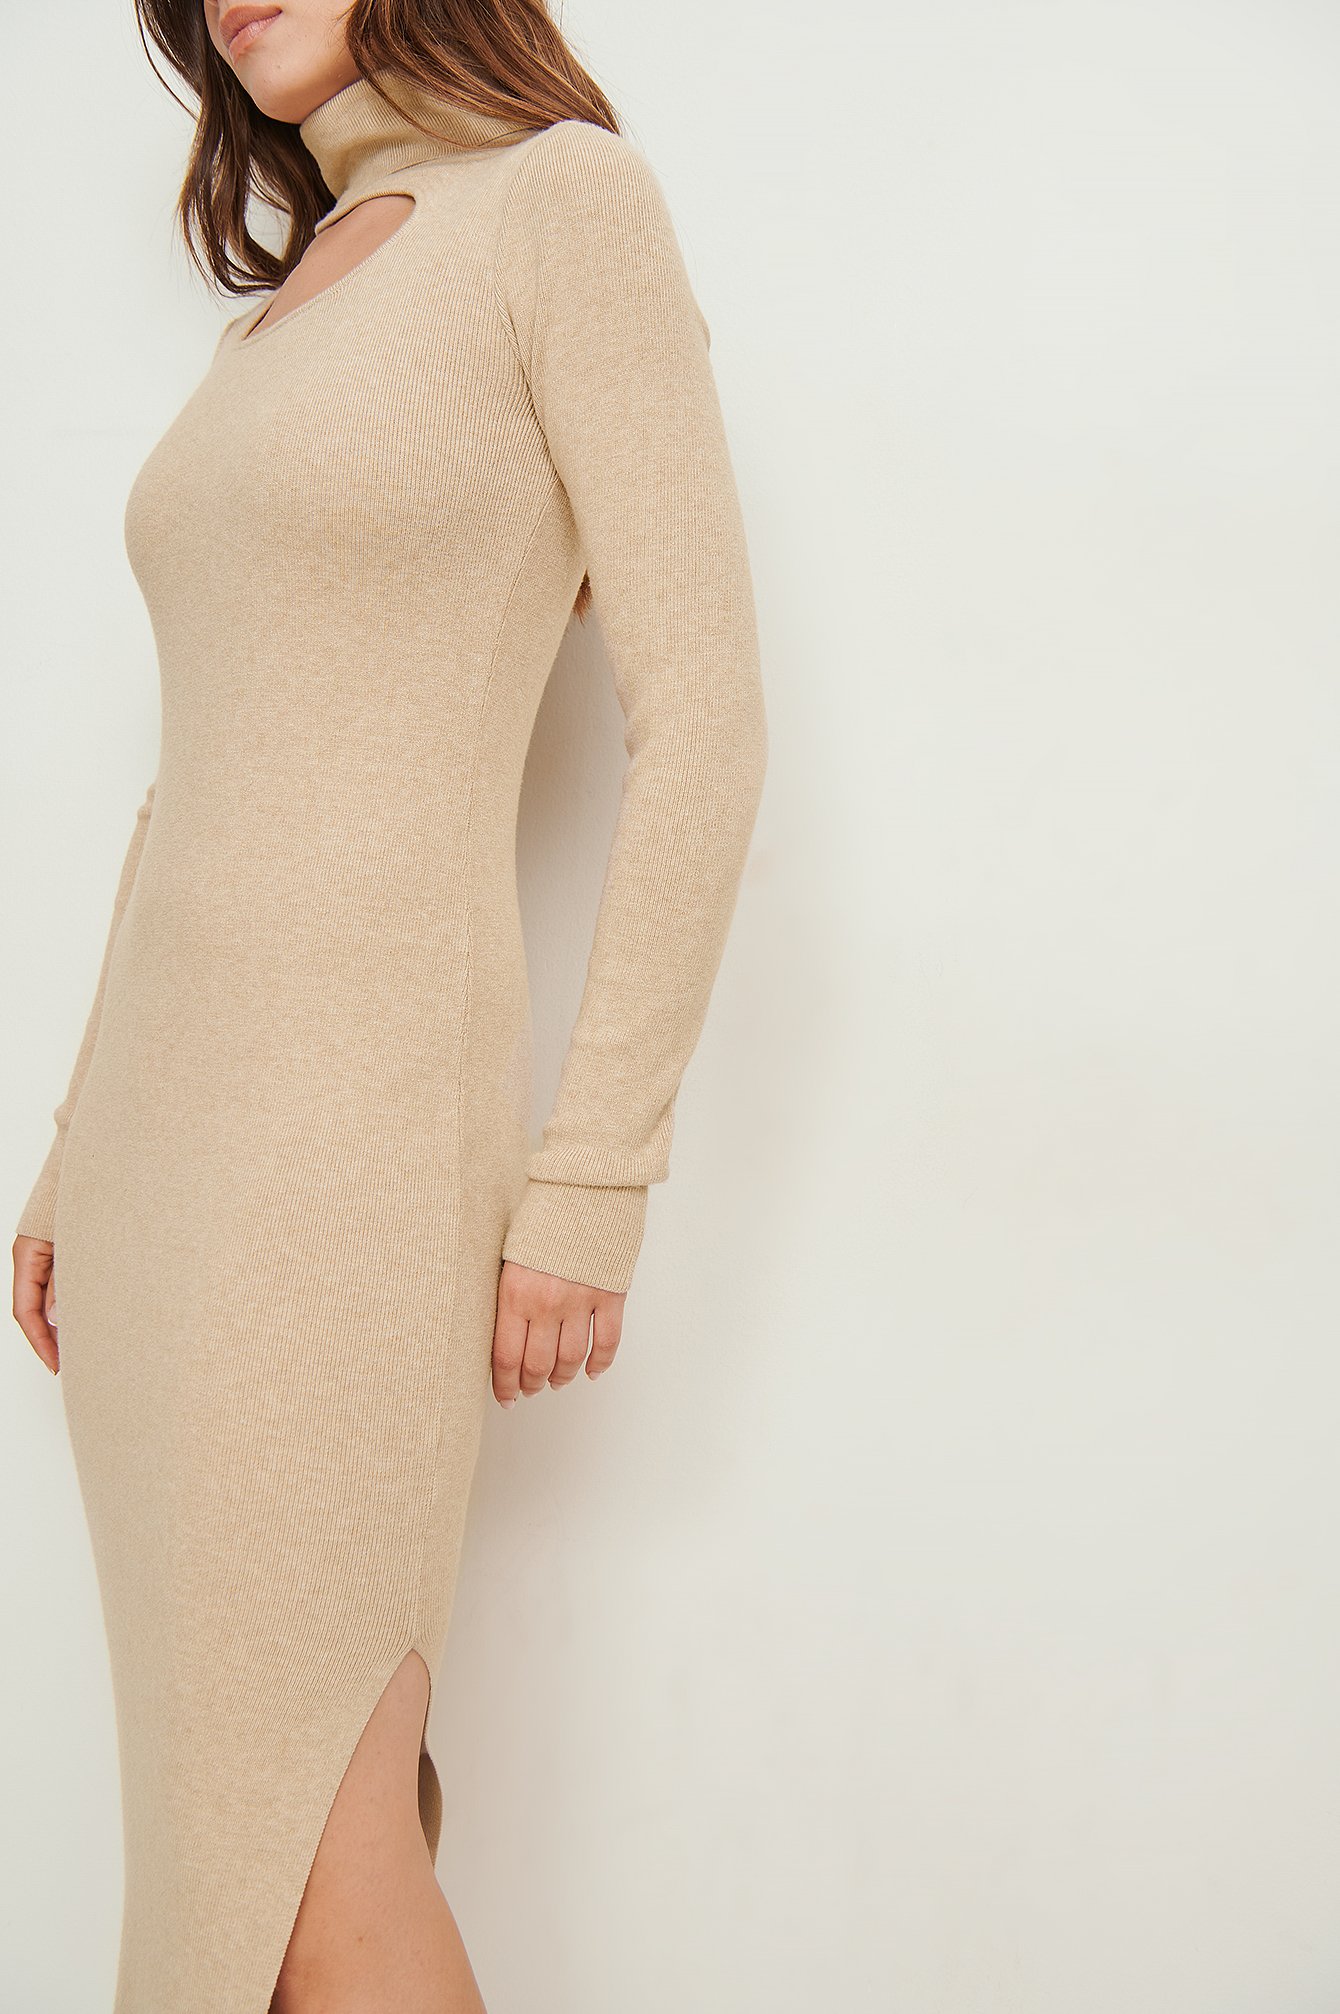 Beige Cut Out High Neck Knitted Dress